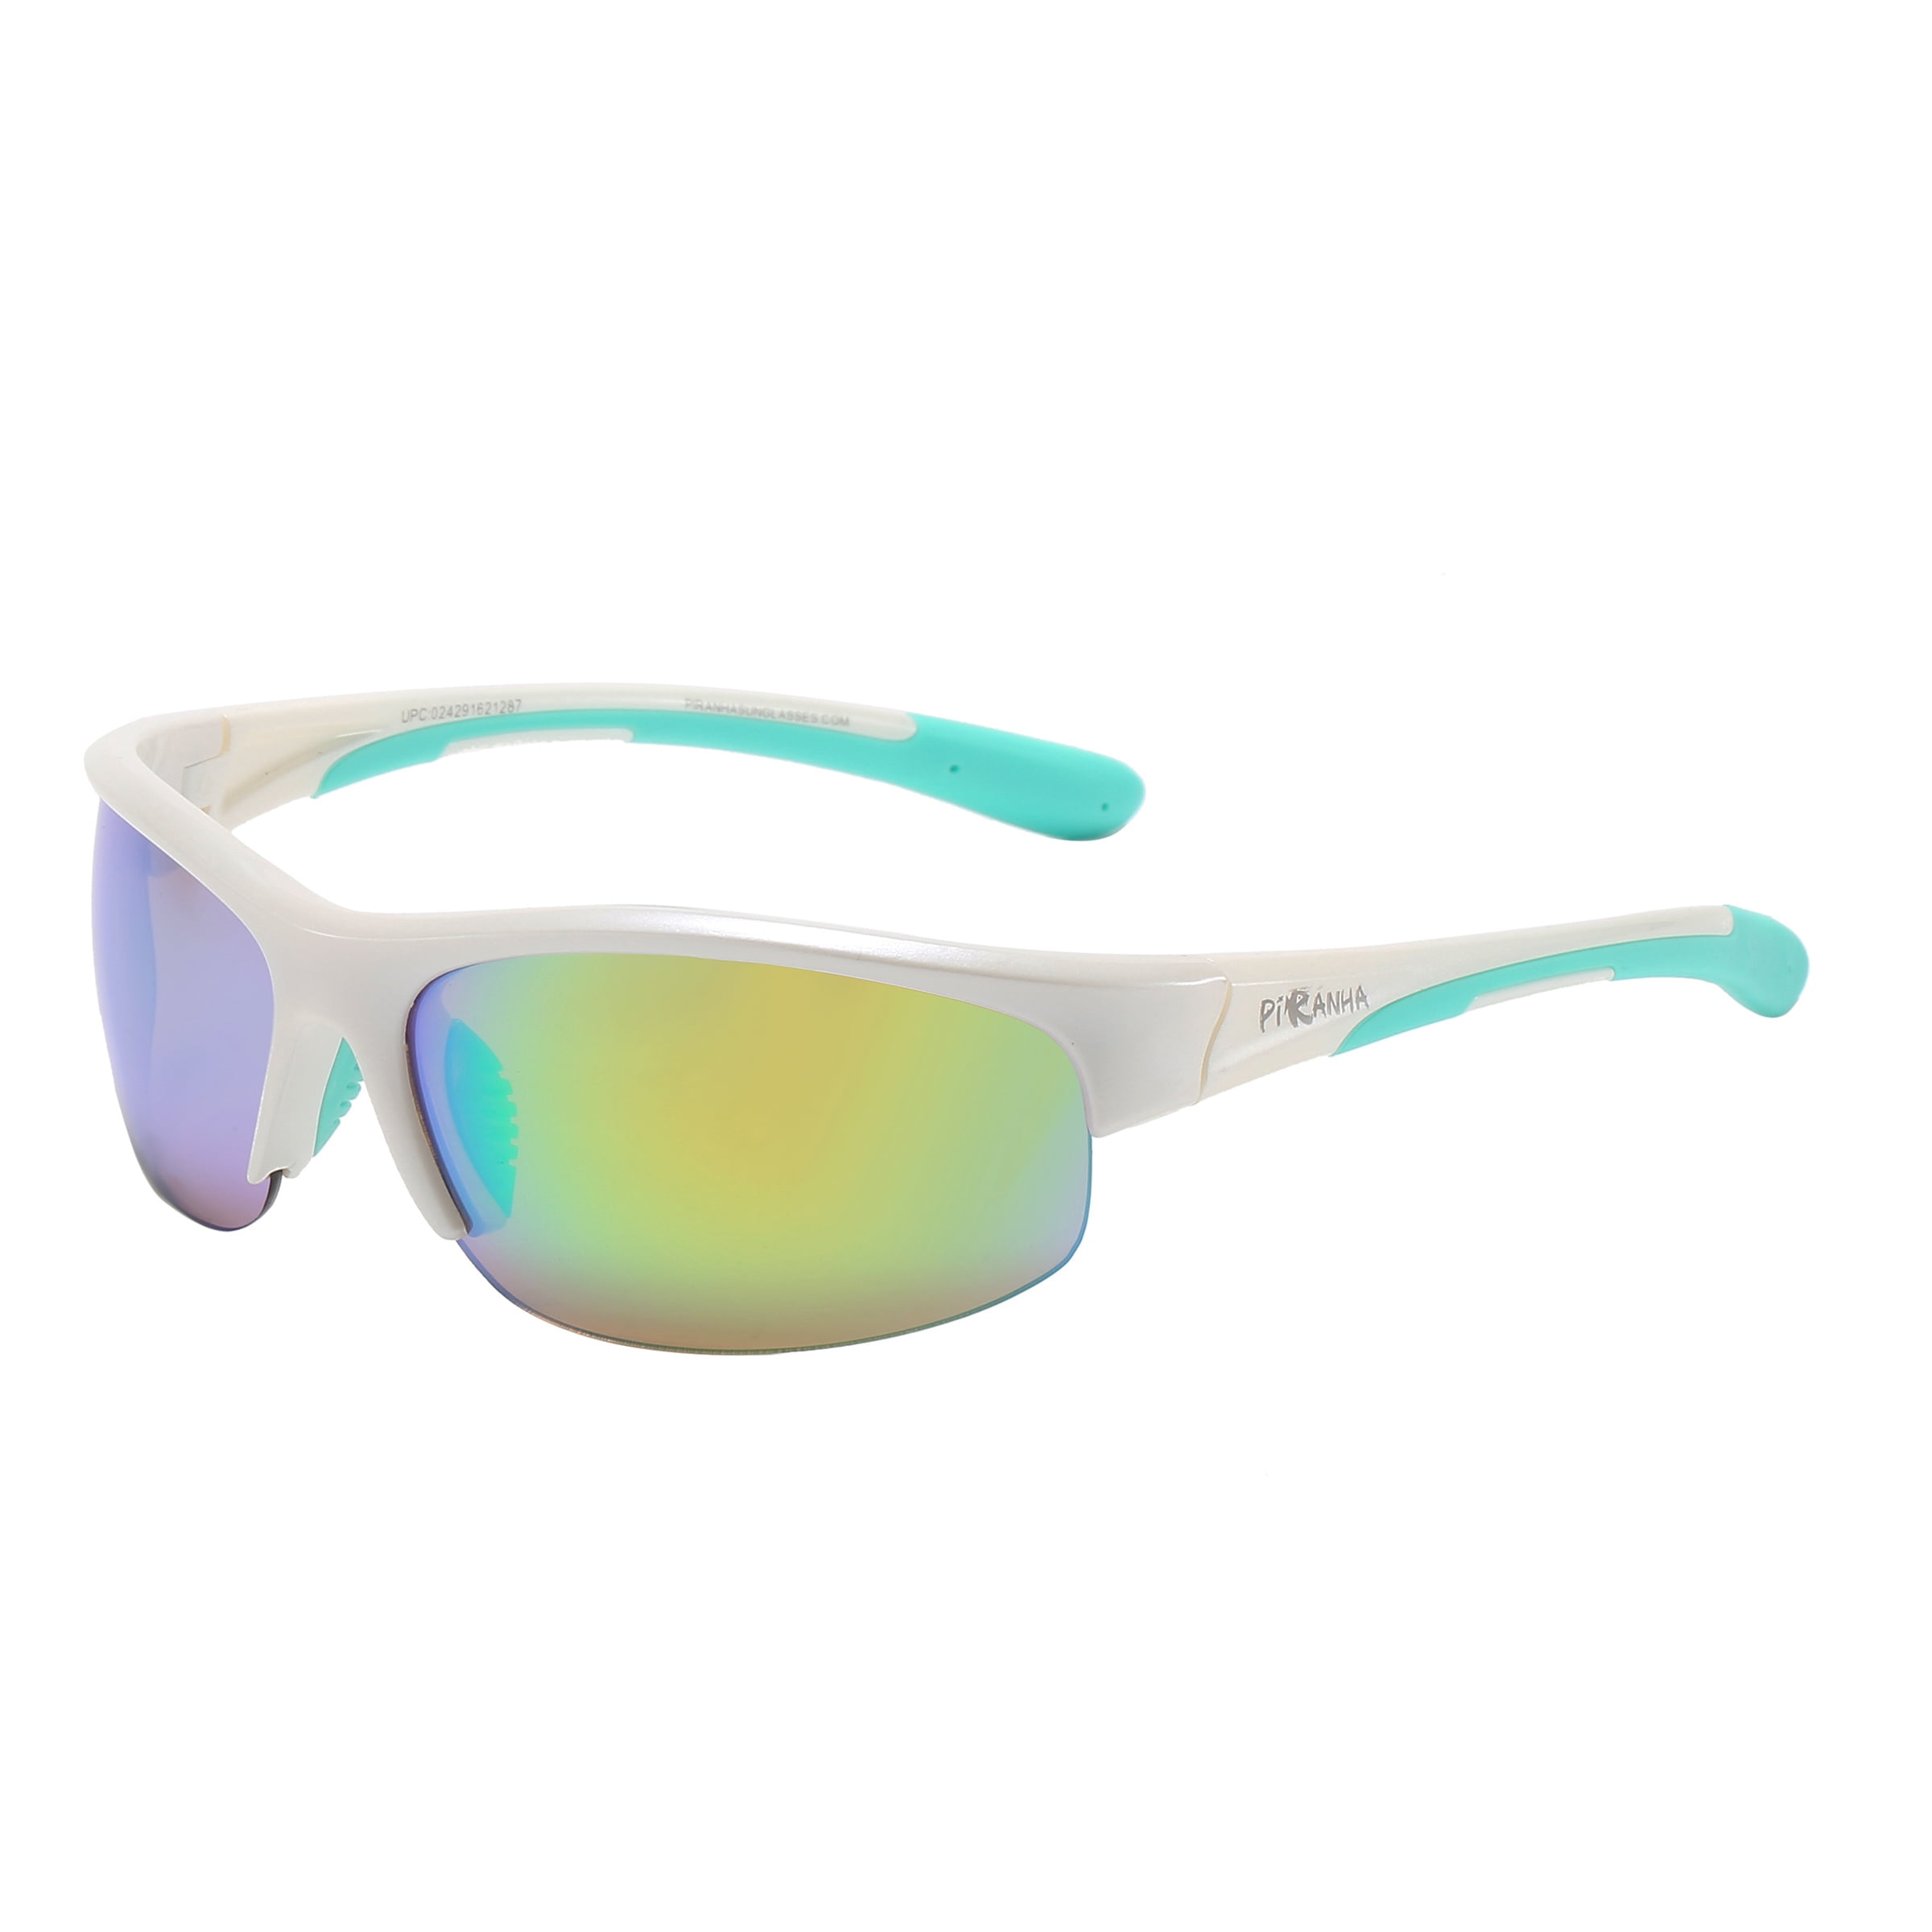 Piranha Eyewear Champion FLX-T White and Teal Sports Sunglasses for Women  with Green Mirror Lens